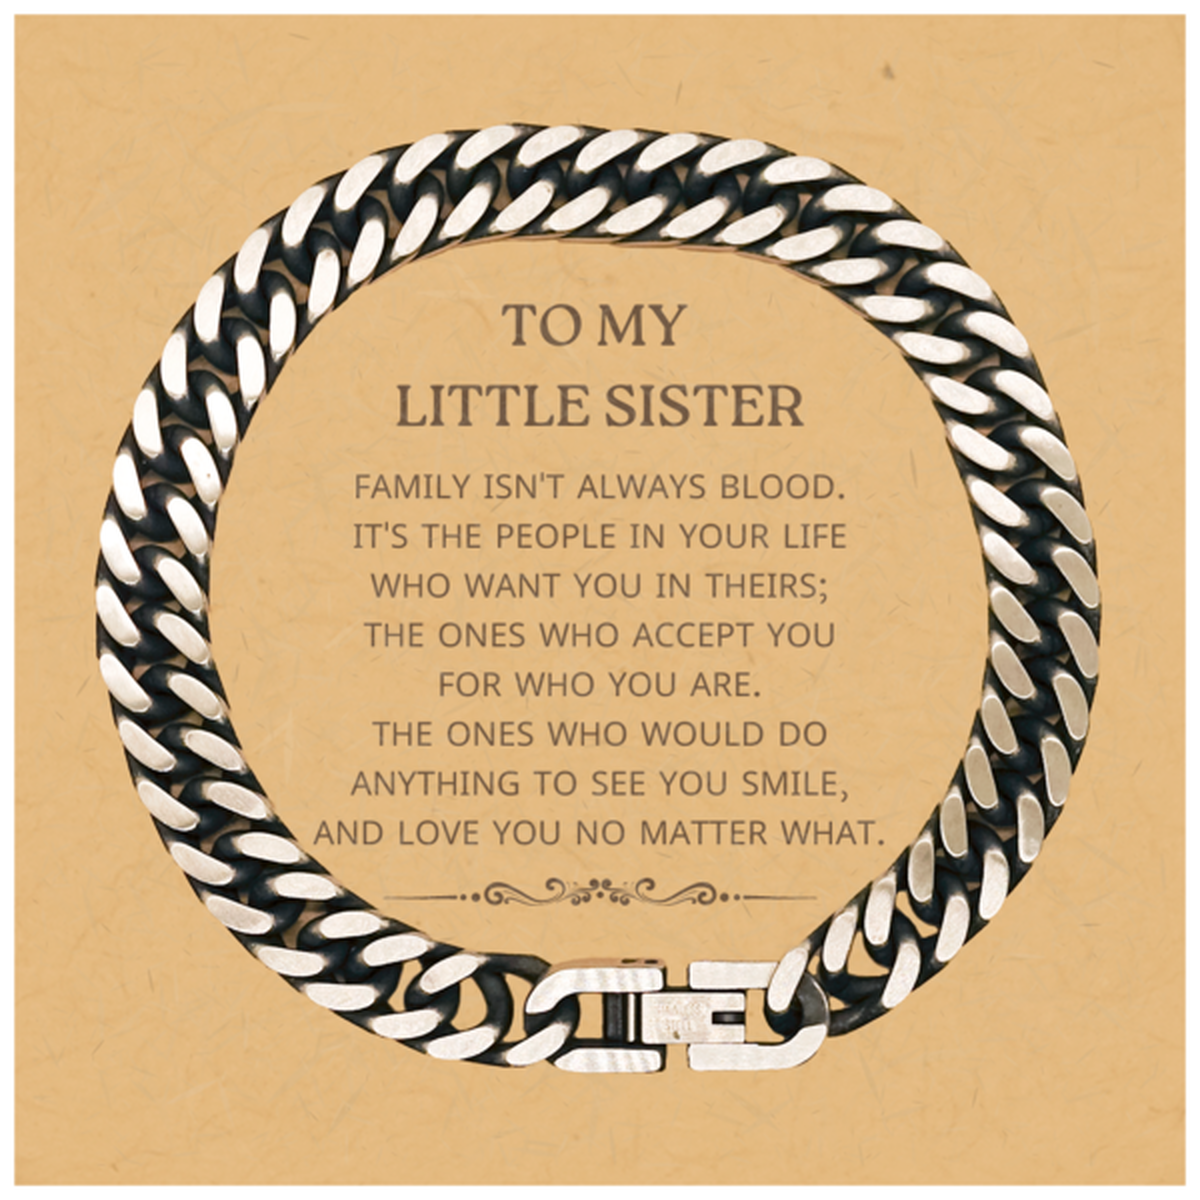 To My Little Sister Gifts, Family isn't always blood, Little Sister Cuban Link Chain Bracelet, Birthday Christmas Unique Present For Little Sister